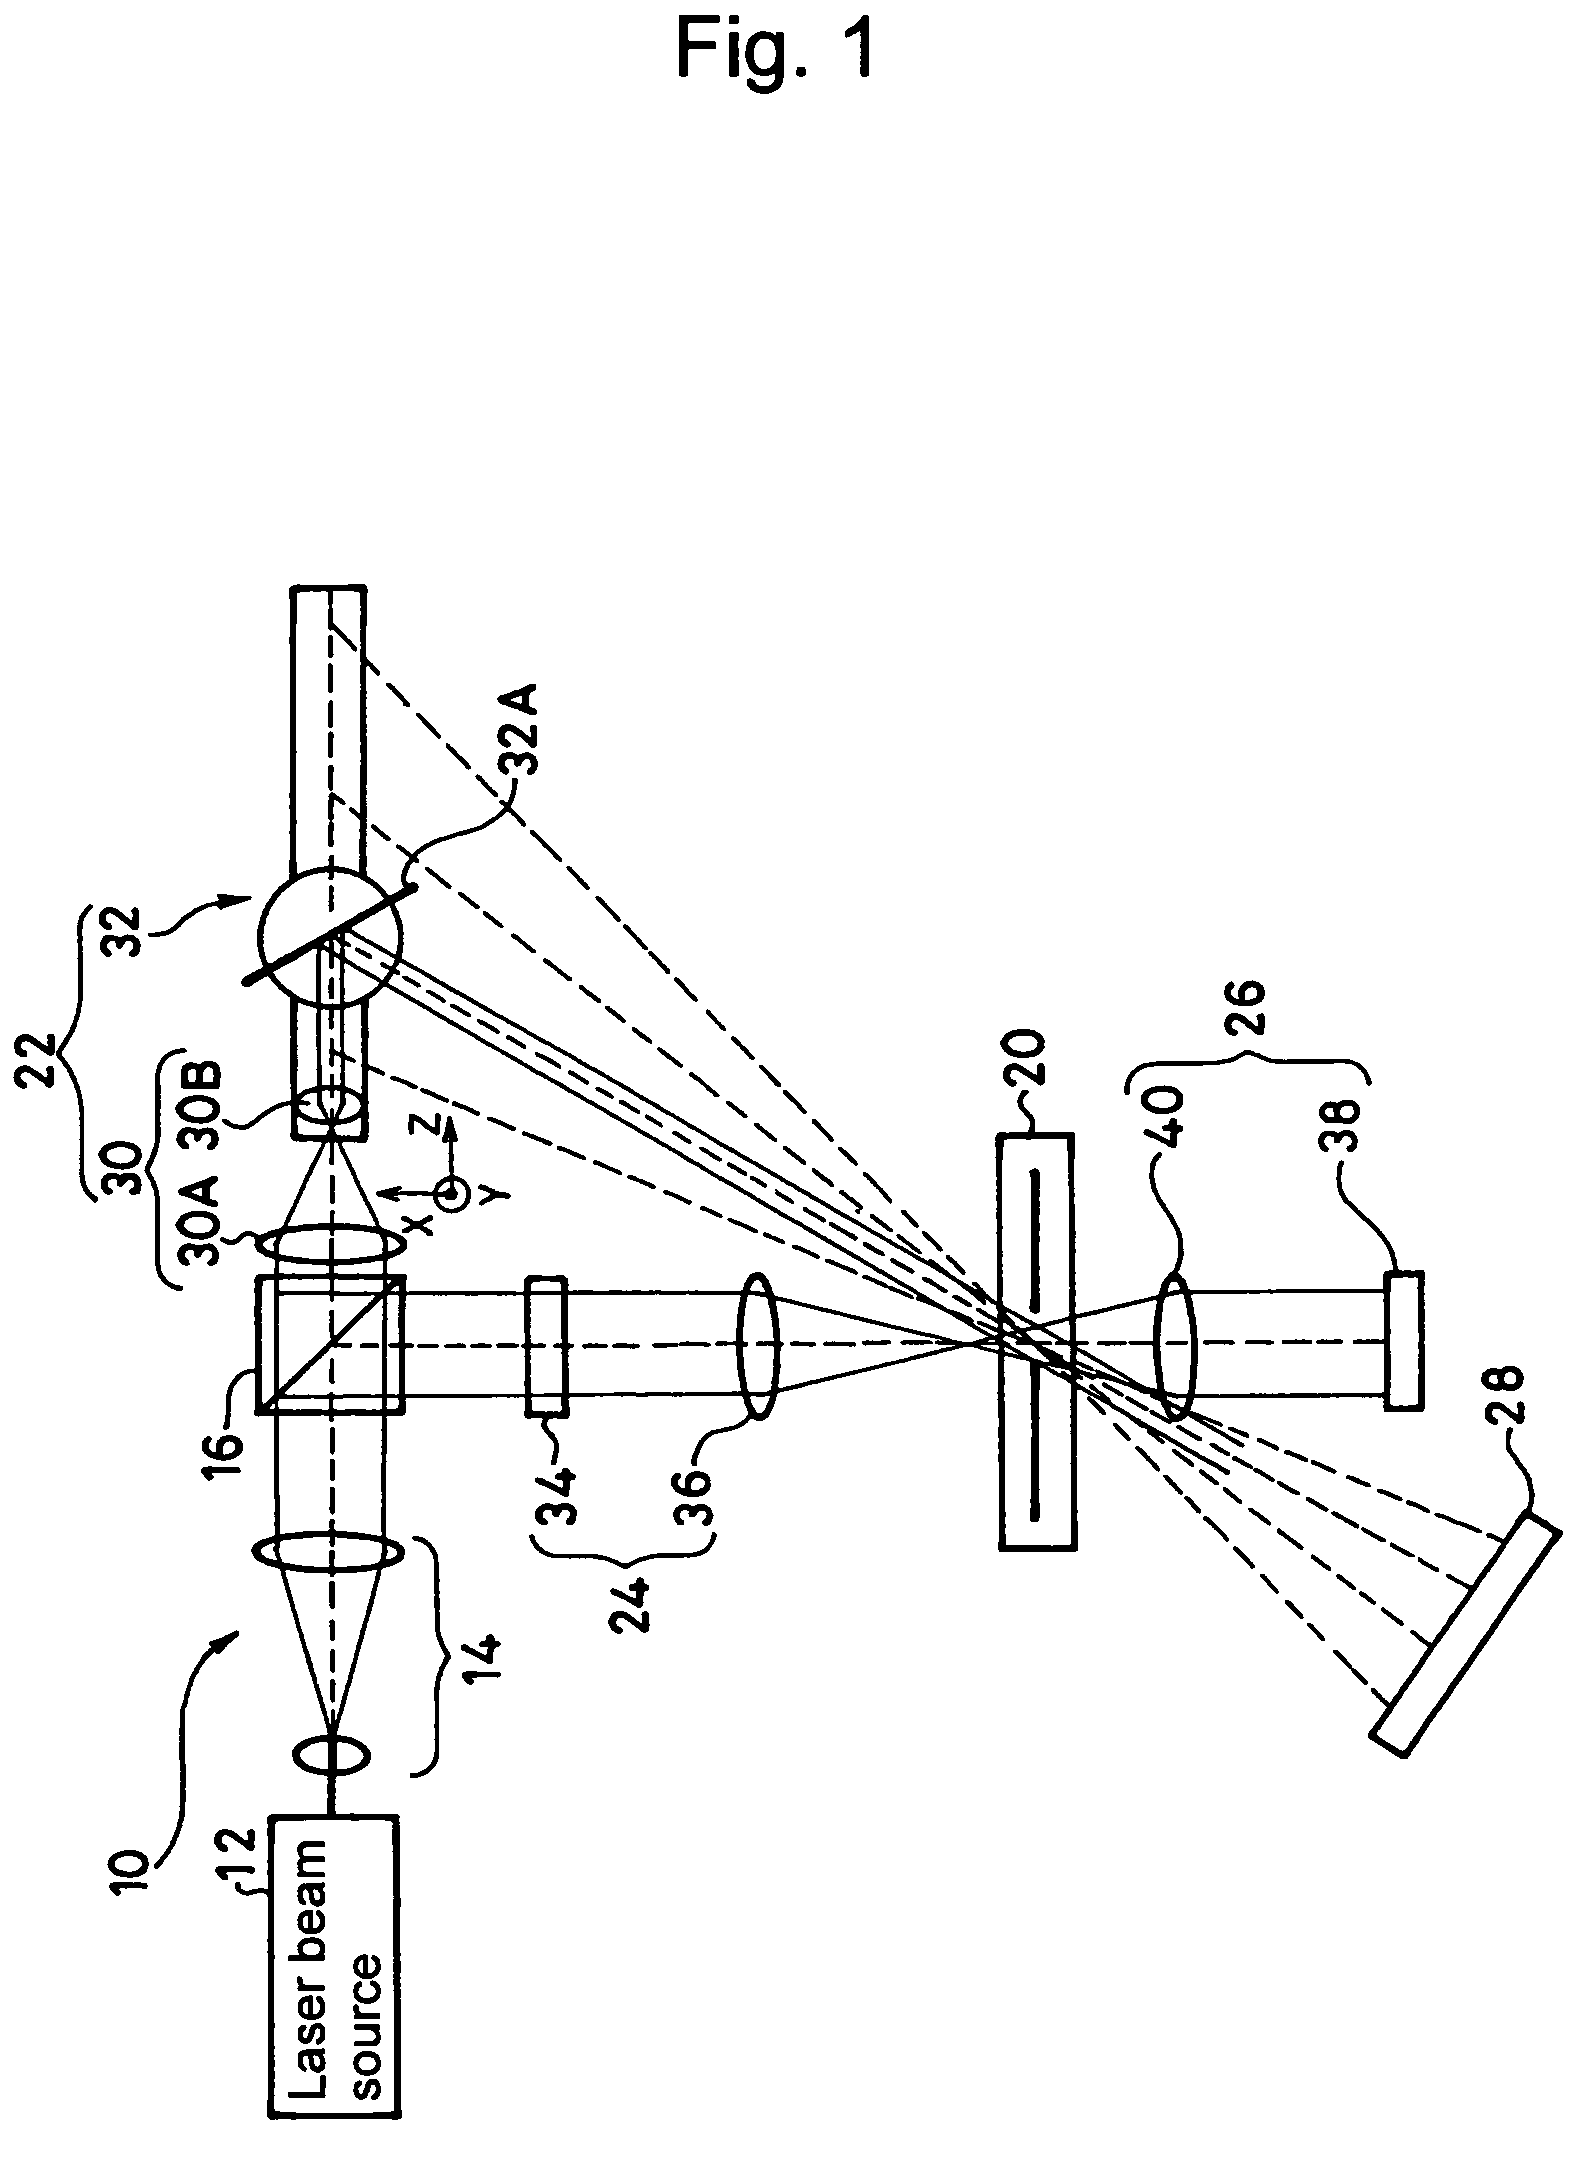 Holographic recording method, holographic recording apparatus, holographic memory reproducing method, holographic memory reproducing apparatus, holographic recording and reproducing apparatus, and holographic recording medium